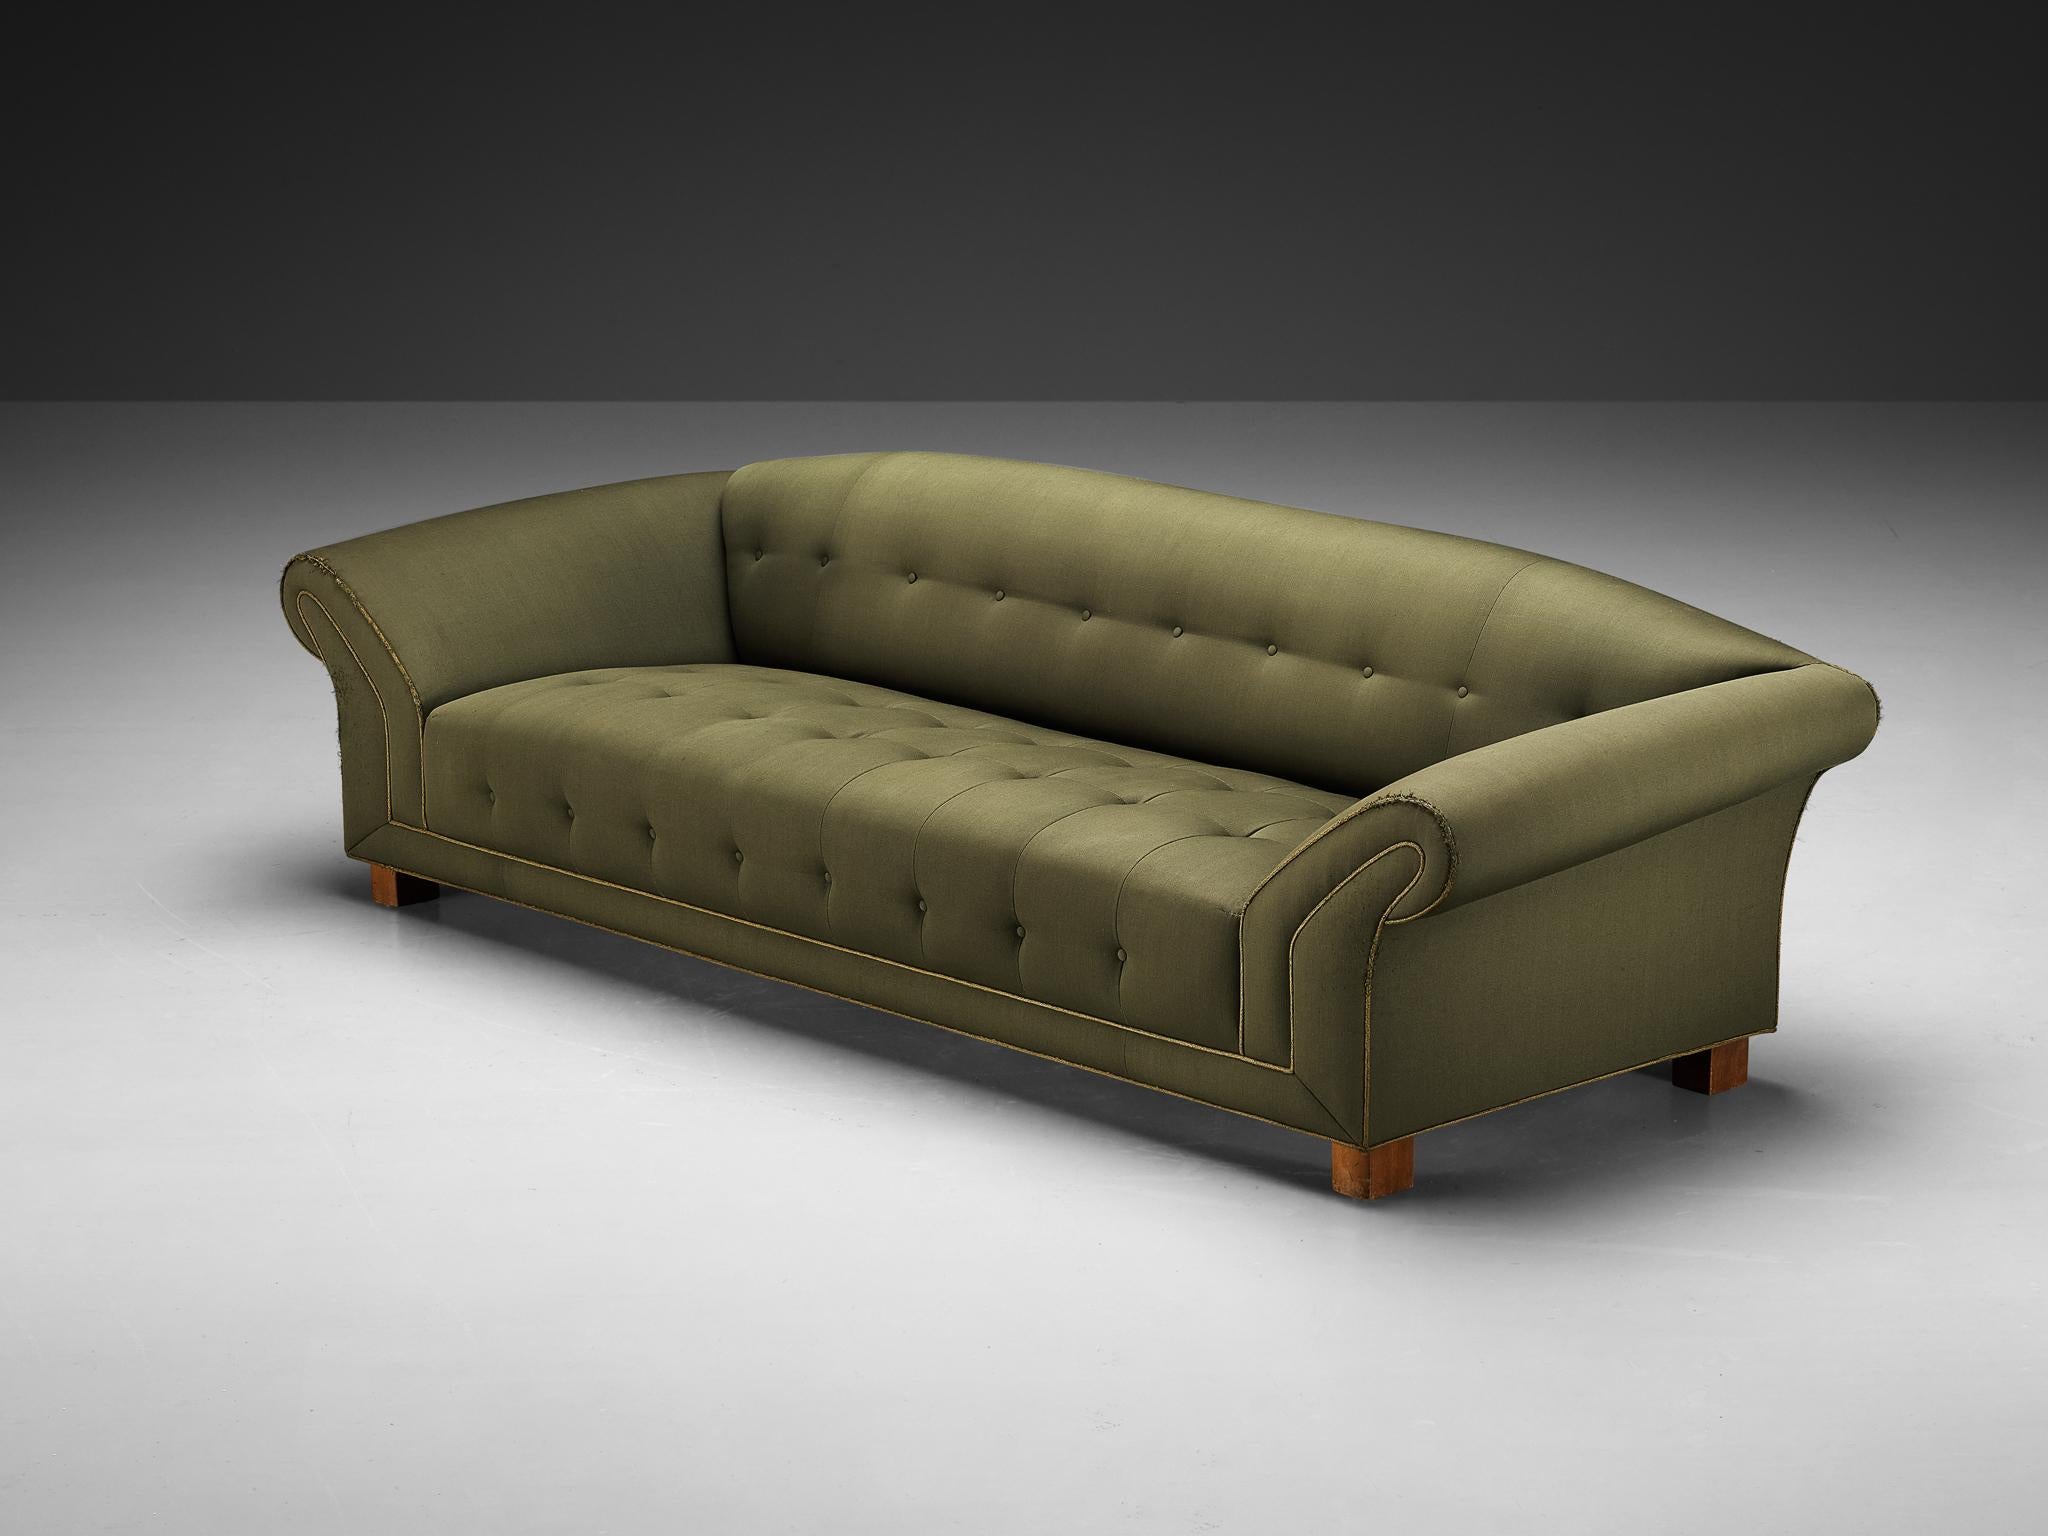 Sofa, fabric, stained beech, Sweden, 1930s

A graceful Swedish sofa hailing from the 1930s, revealing distinctive Art Deco influences. Its hallmark features include a generously proportioned and robust framework, with a refined and graceful profile